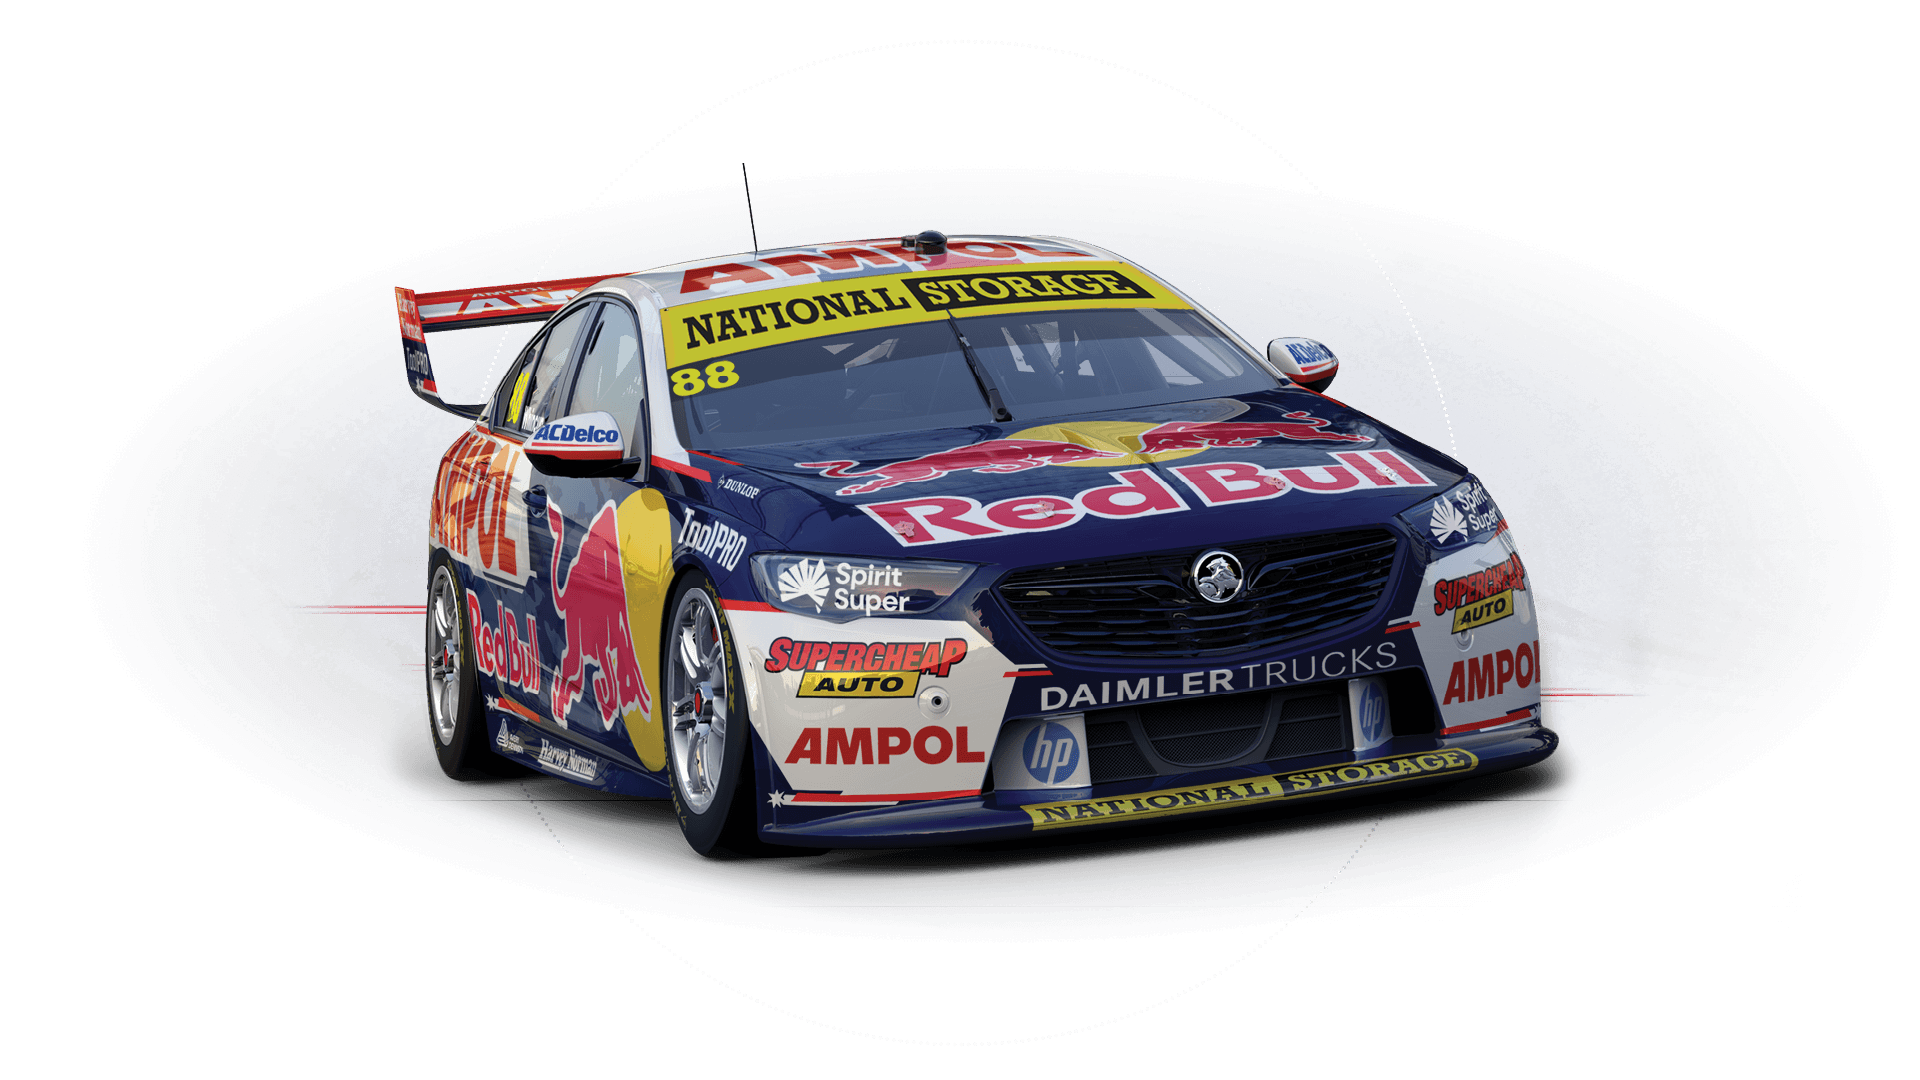 v8 supercars racing today